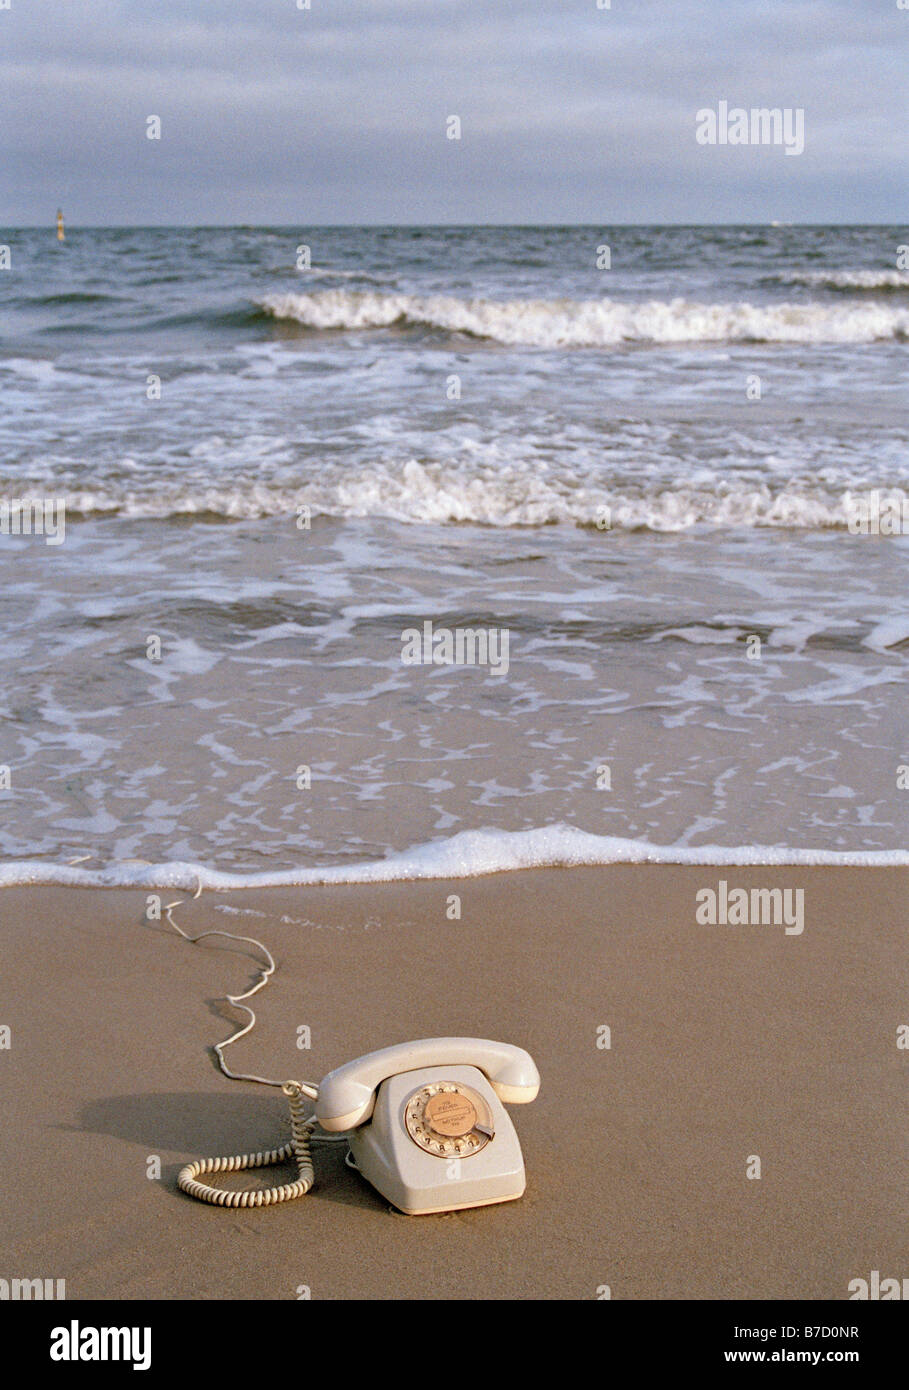 A rotary telephone on a beach at the water's edge Stock Photo